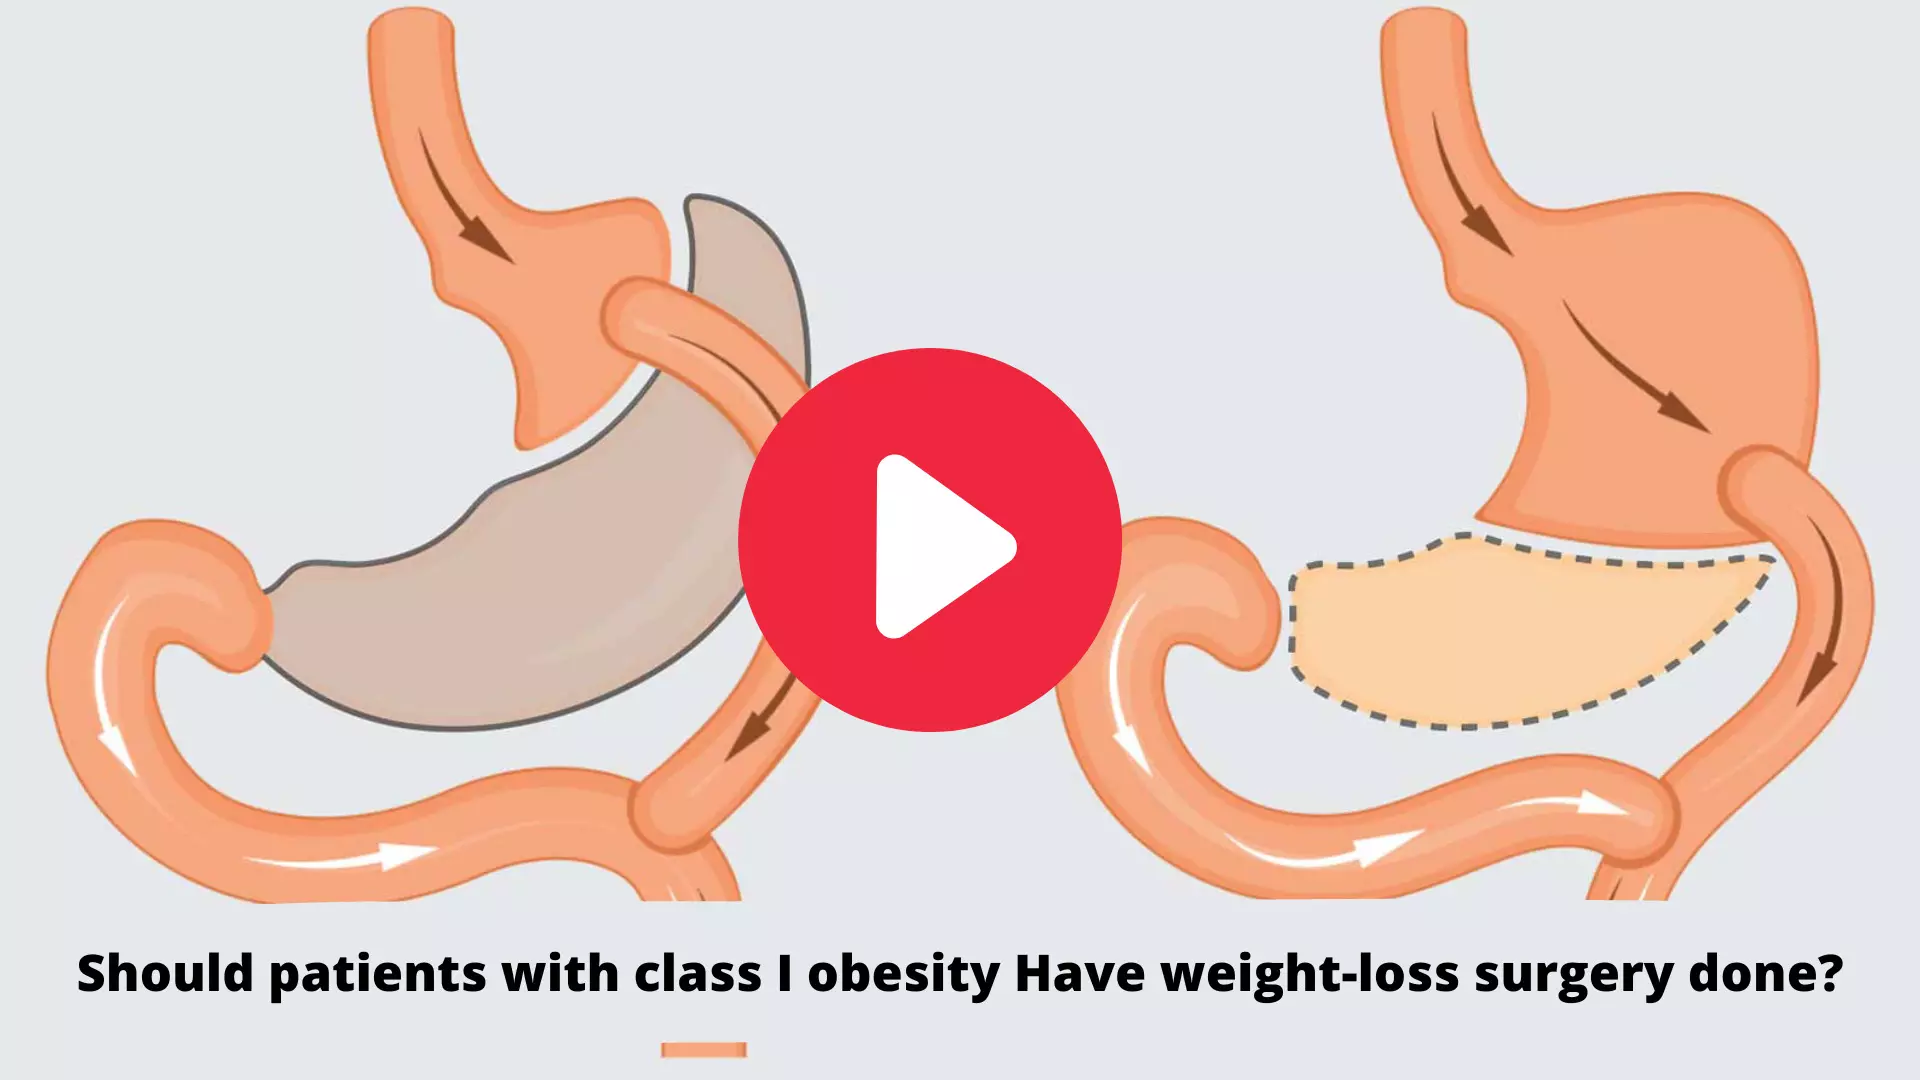 Should patients with class I obesity Have weight-loss surgery done?